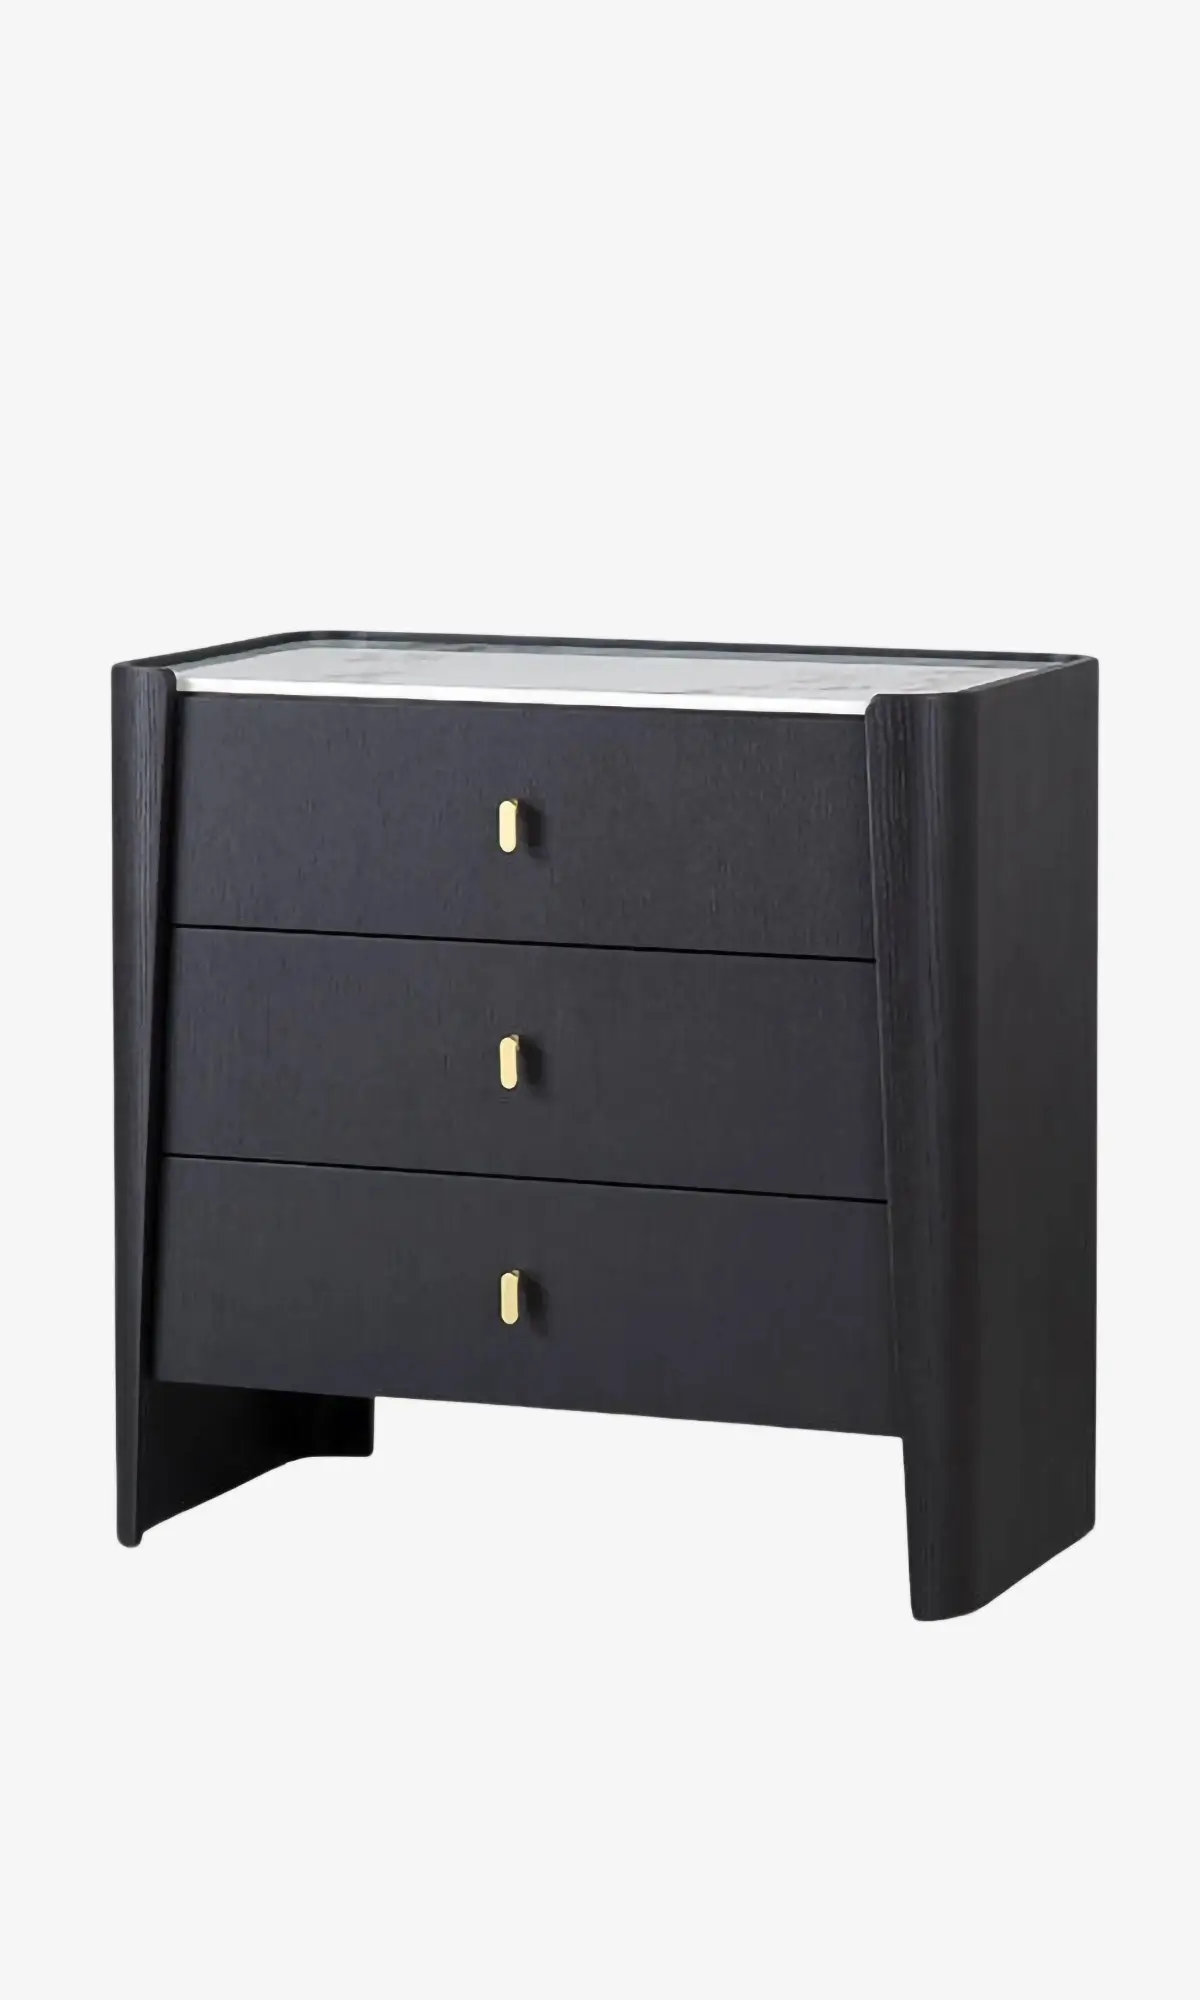 designer luxury chest product category